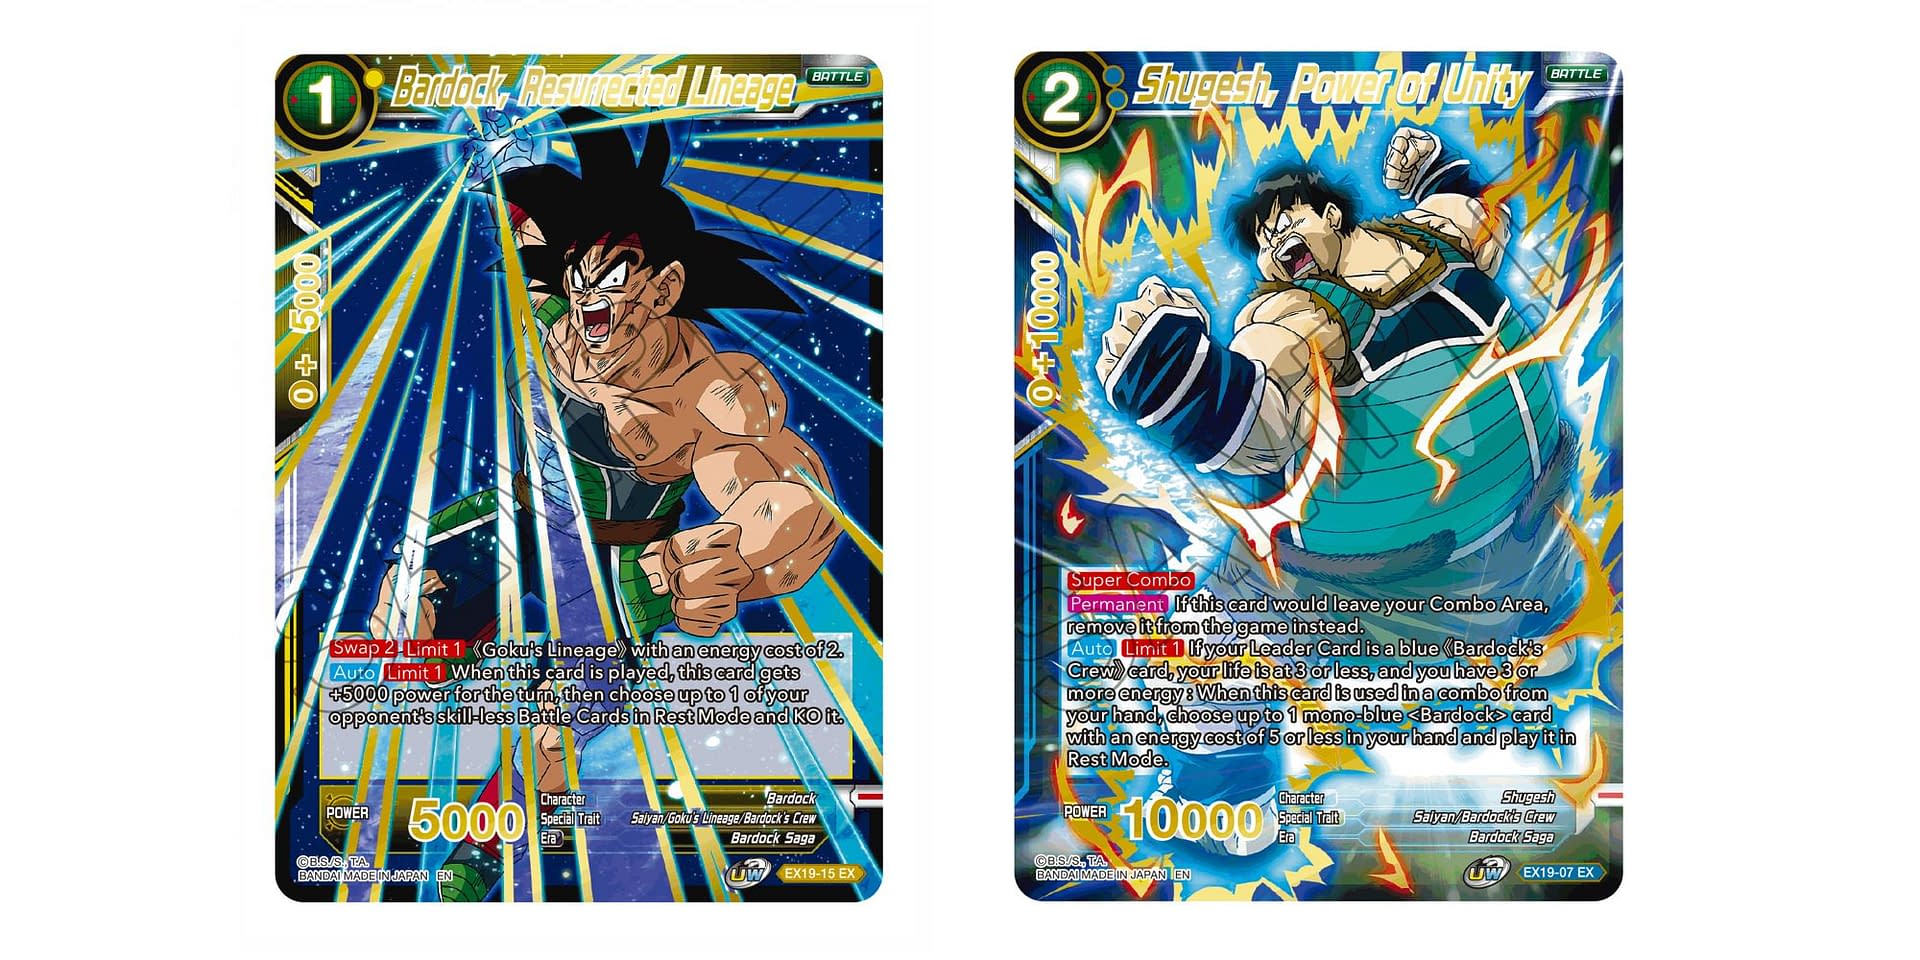 Bardock Features In Dragon Ball Super Card Game 21 Anniversary Set